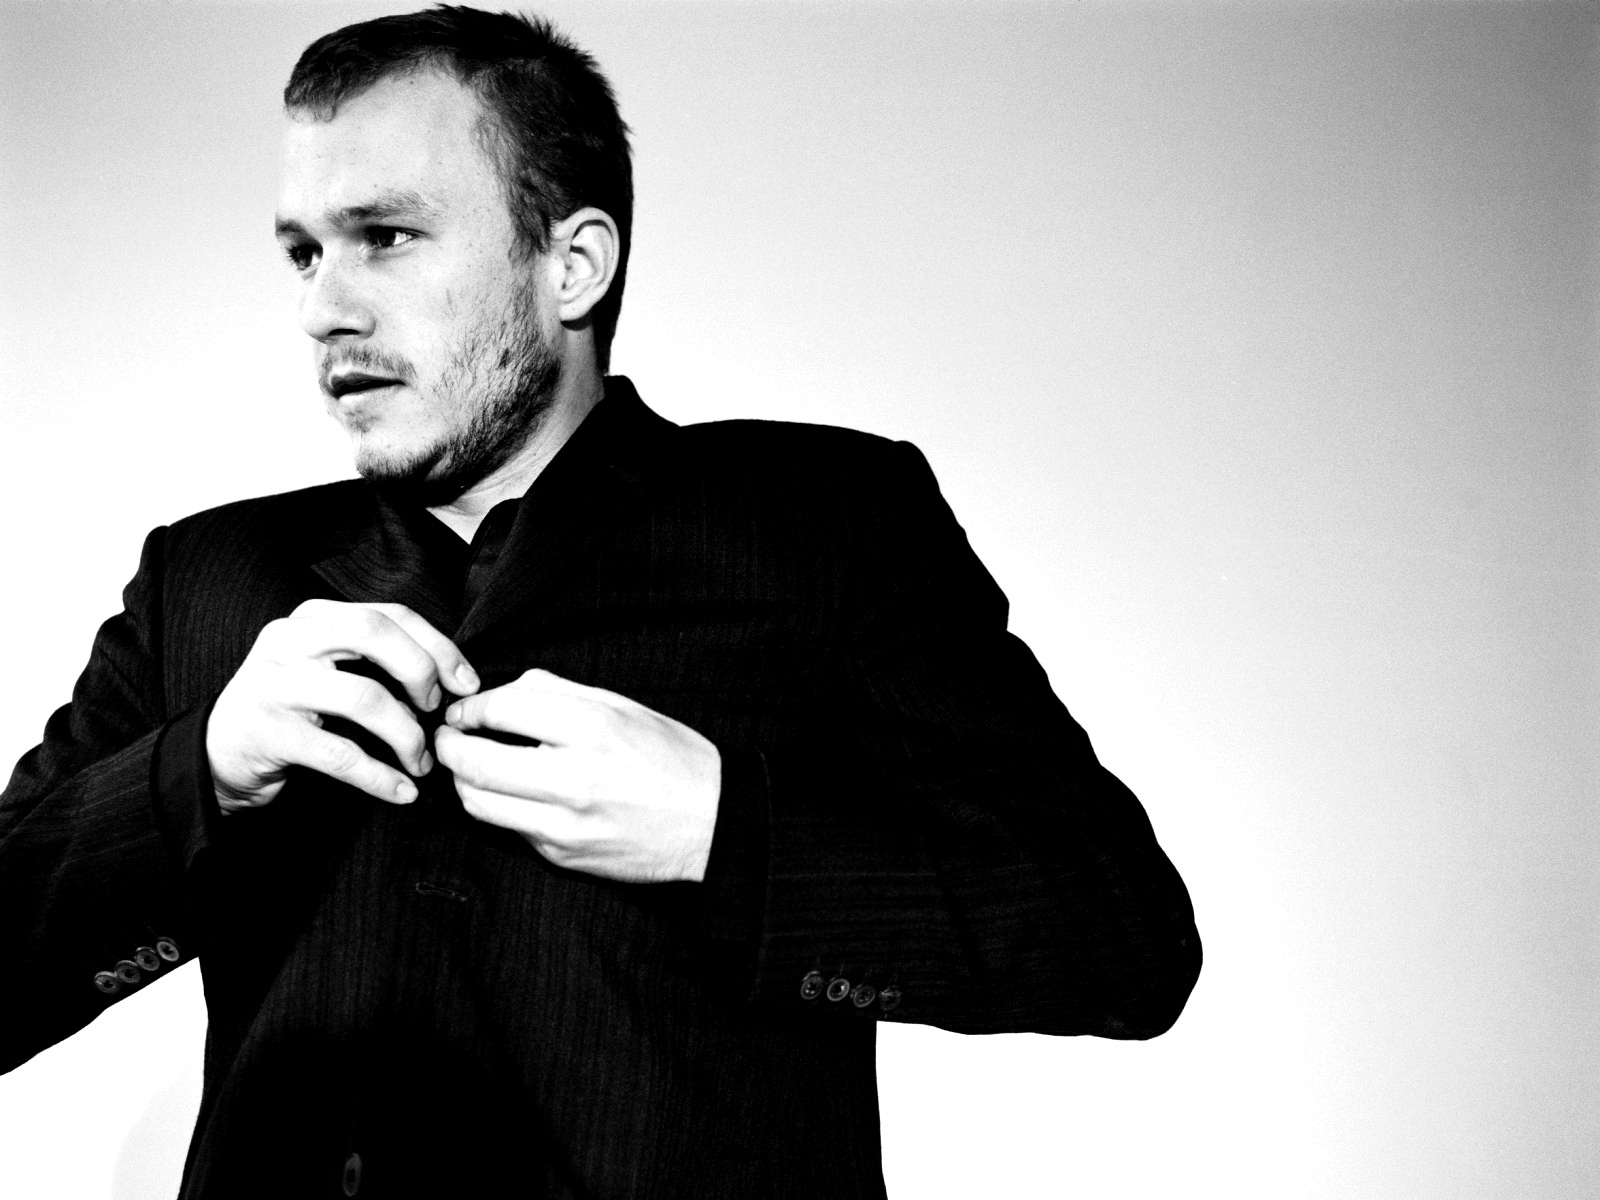 heath ledger hd wallpaper,suit,black and white,photography,formal wear,gesture